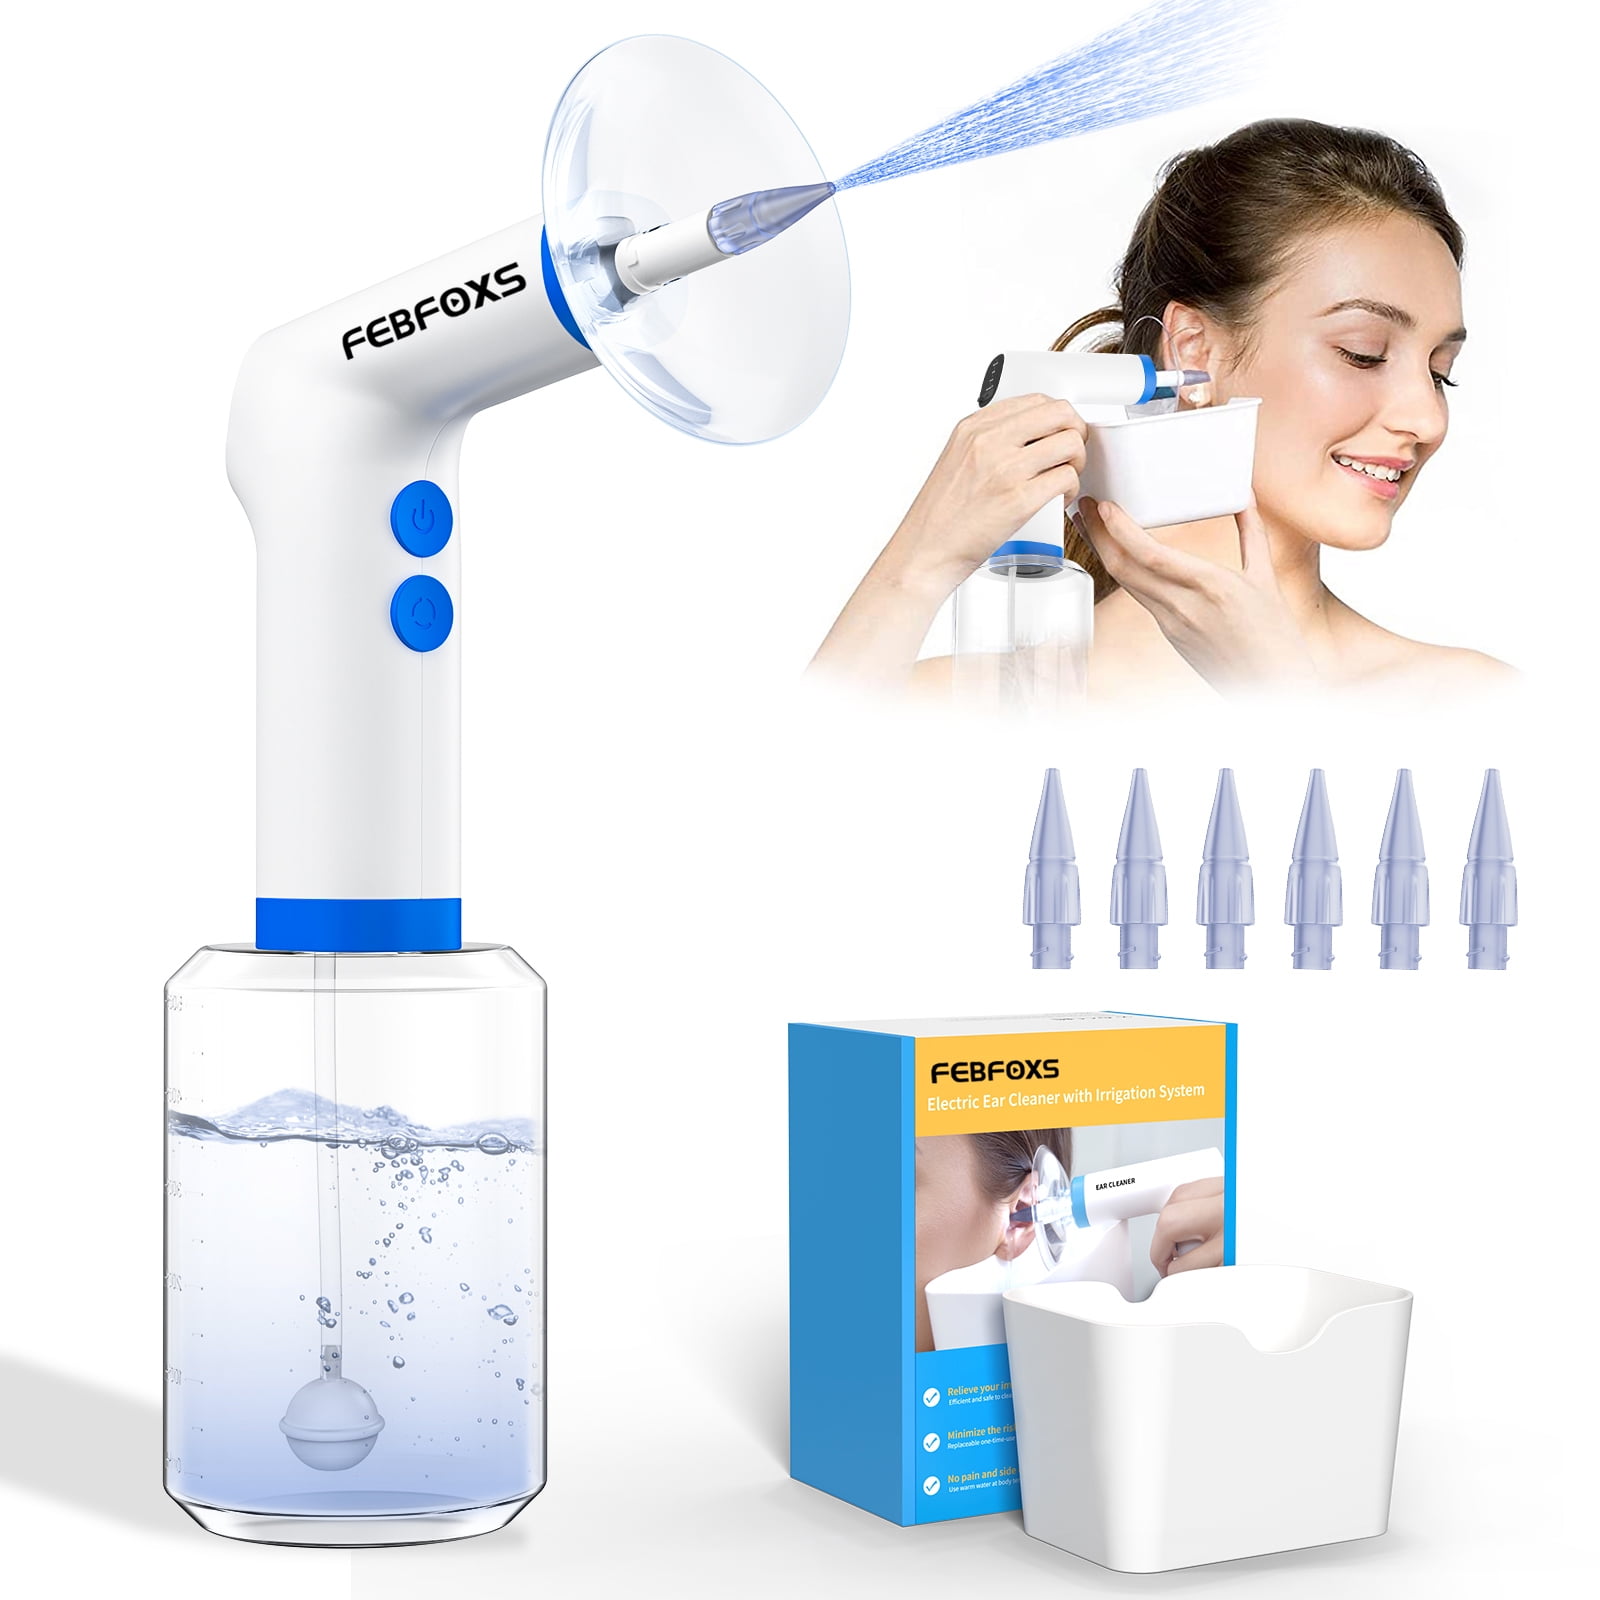 Febfoxs Ear Wax Removal, Ear Cleaning Kit,4 Cleaning Modes, One-Touch Start  Water Spray,5 Ear Tips & Ear Basin